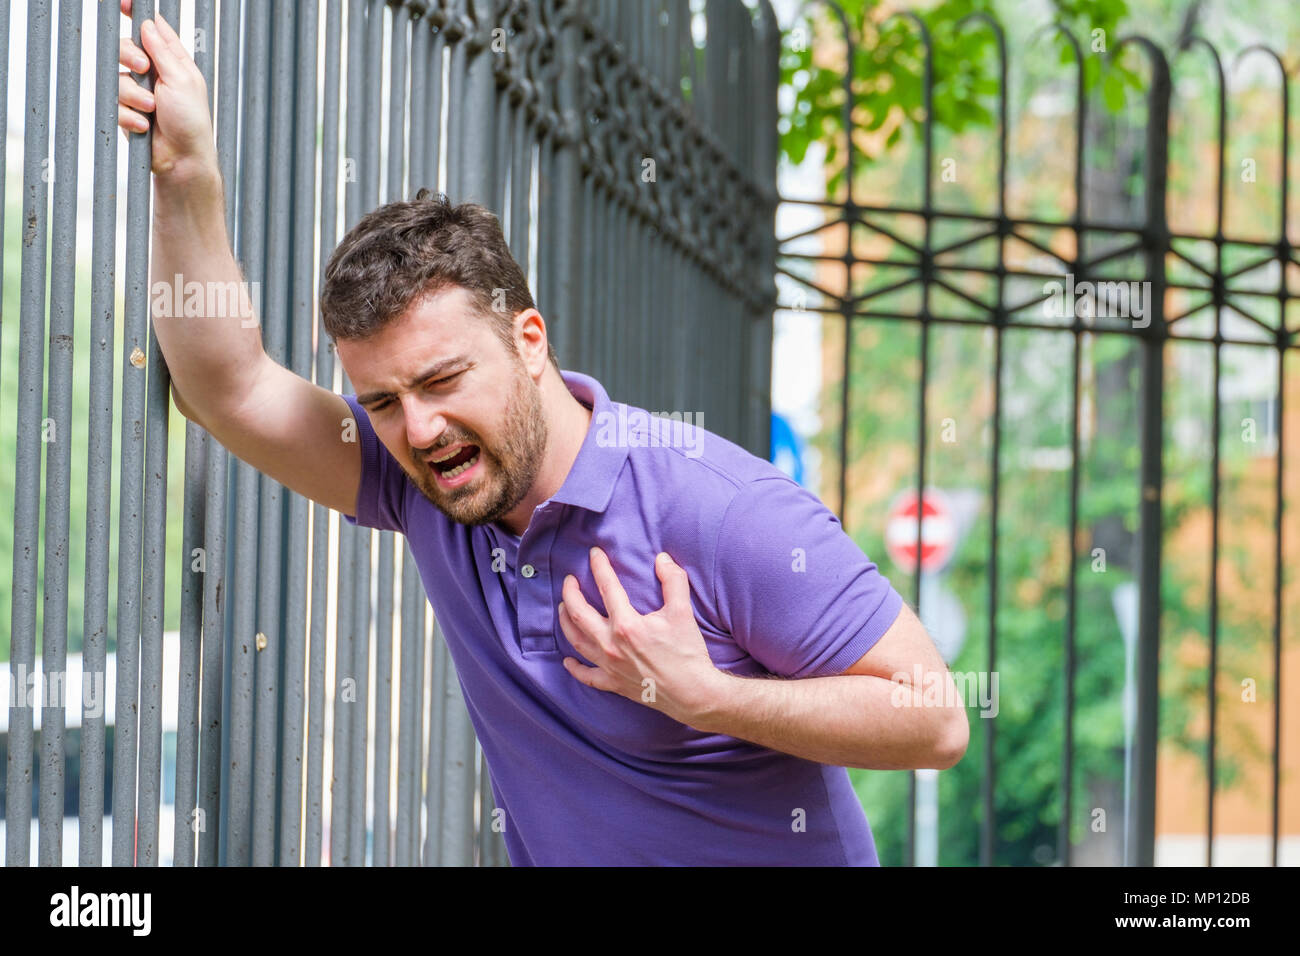 Severe heartache.Man pressing on chest with painful expression fist aid needed. Stock Photo